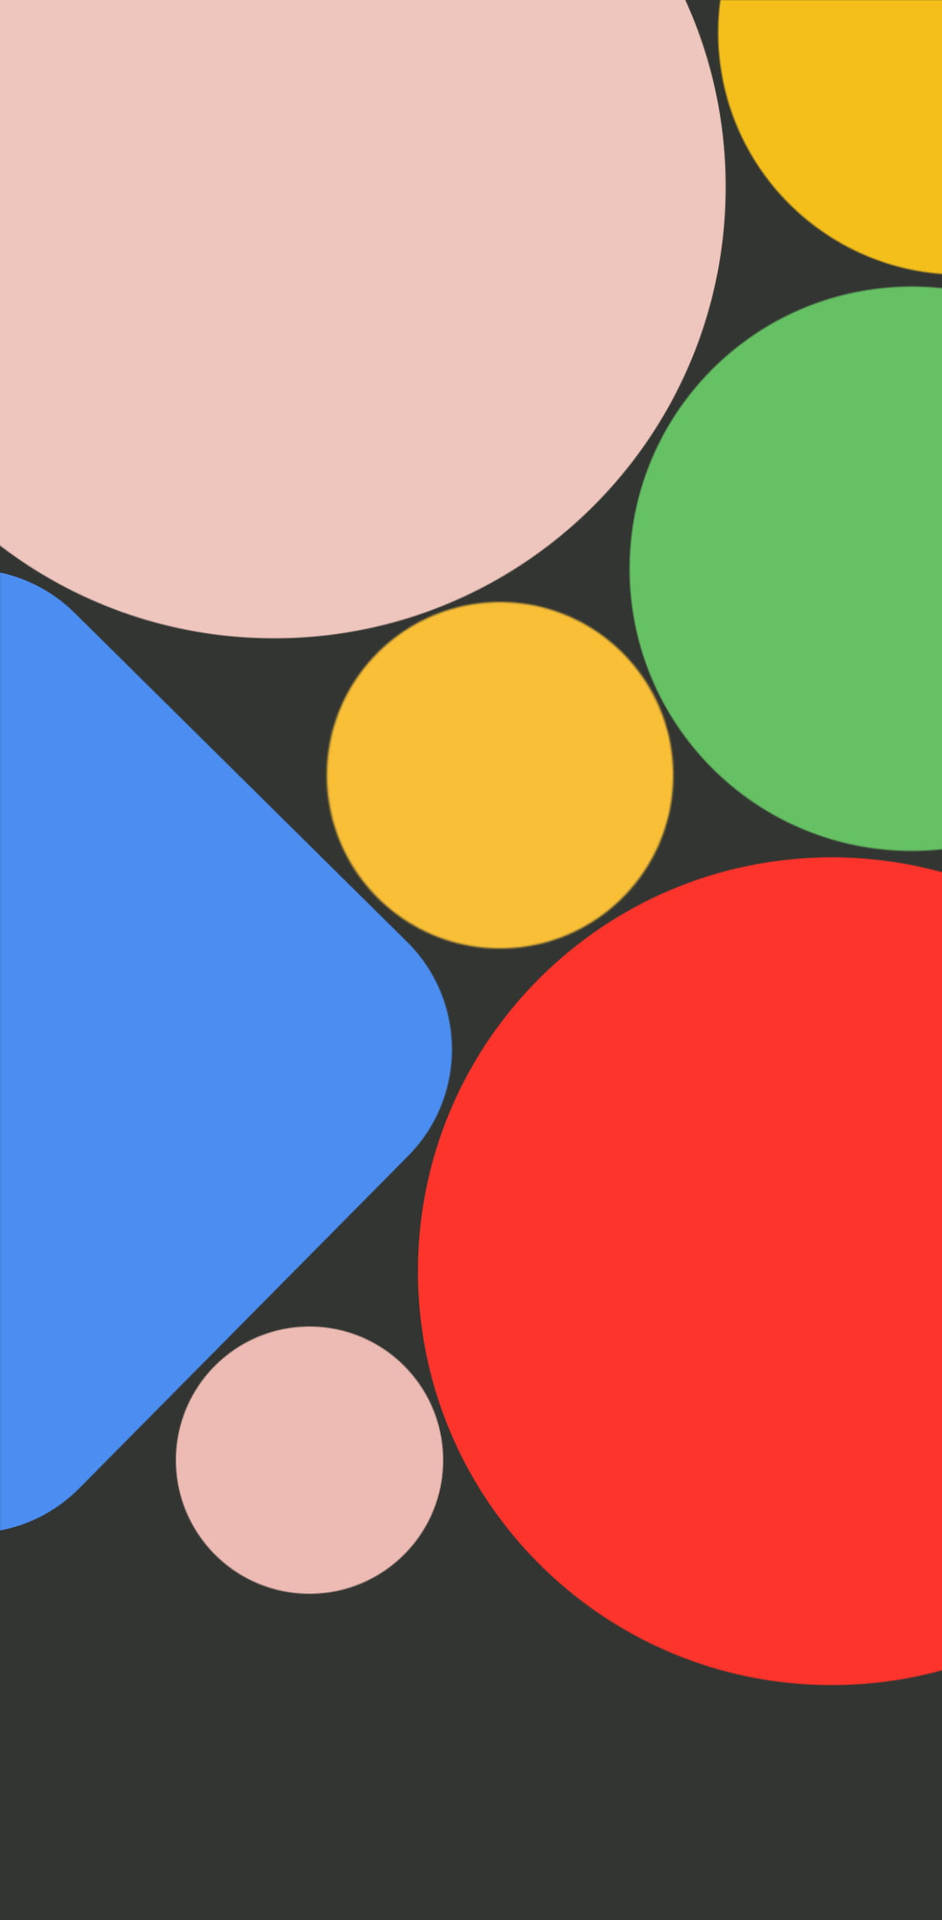 Pastel And Solid Shapes Google Pixel 4a Wallpaper